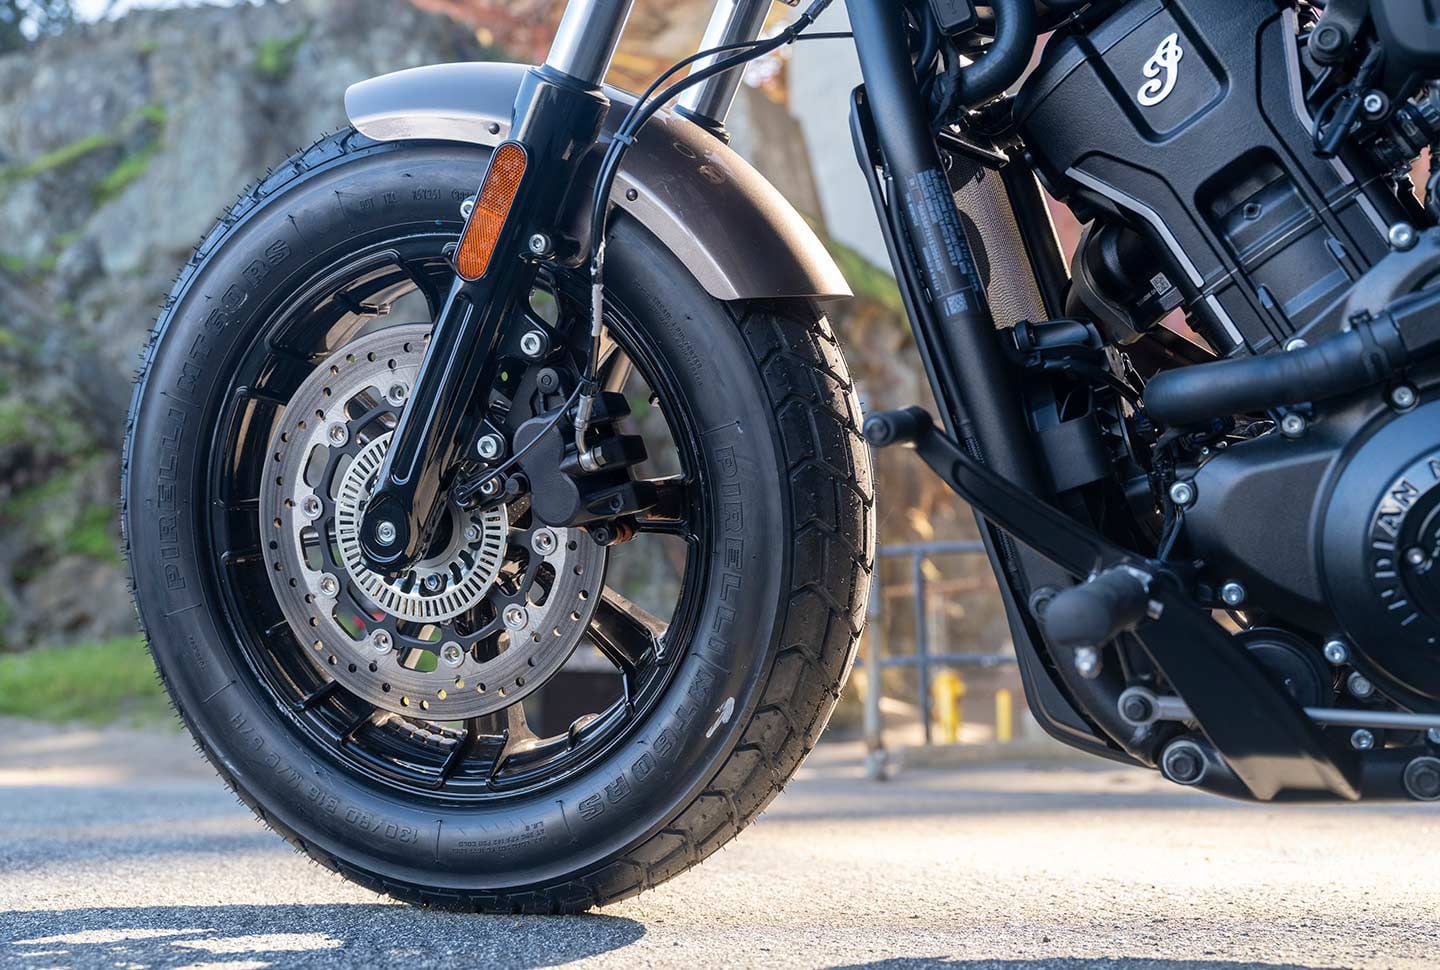 All models besides the 101 Scout use a 298mm single front disc (shown). The 101 gets dual 320mm discs with Brembo calipers. Notice also the nonadjustable fork that’s standard on all but the 101 Scout.